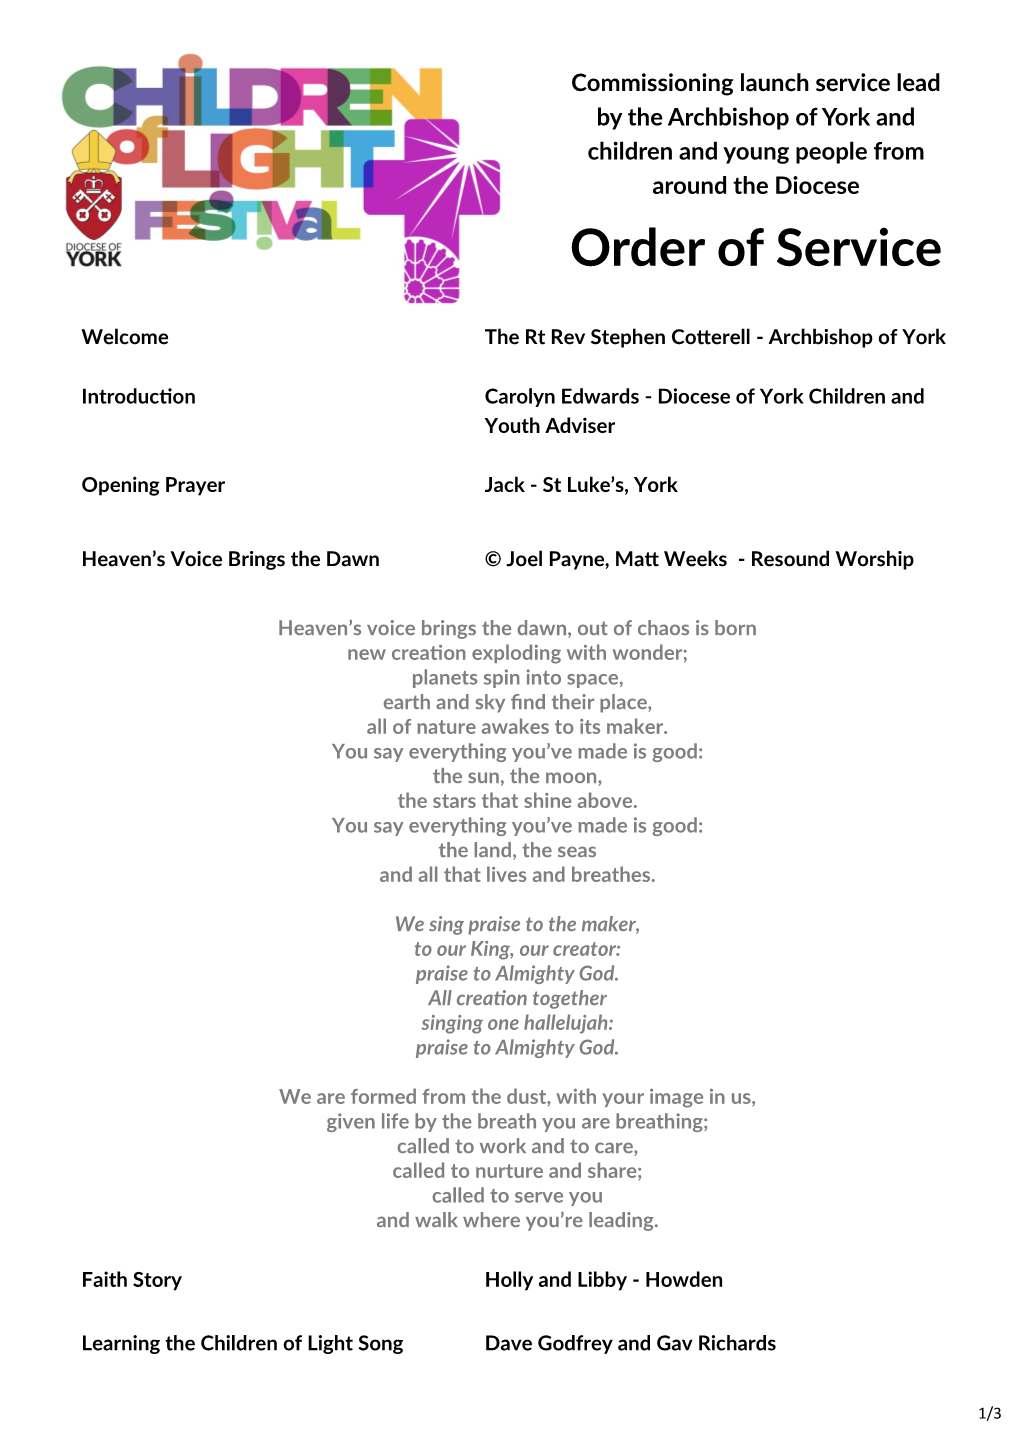 Order of Service for Children of Light Commissioning